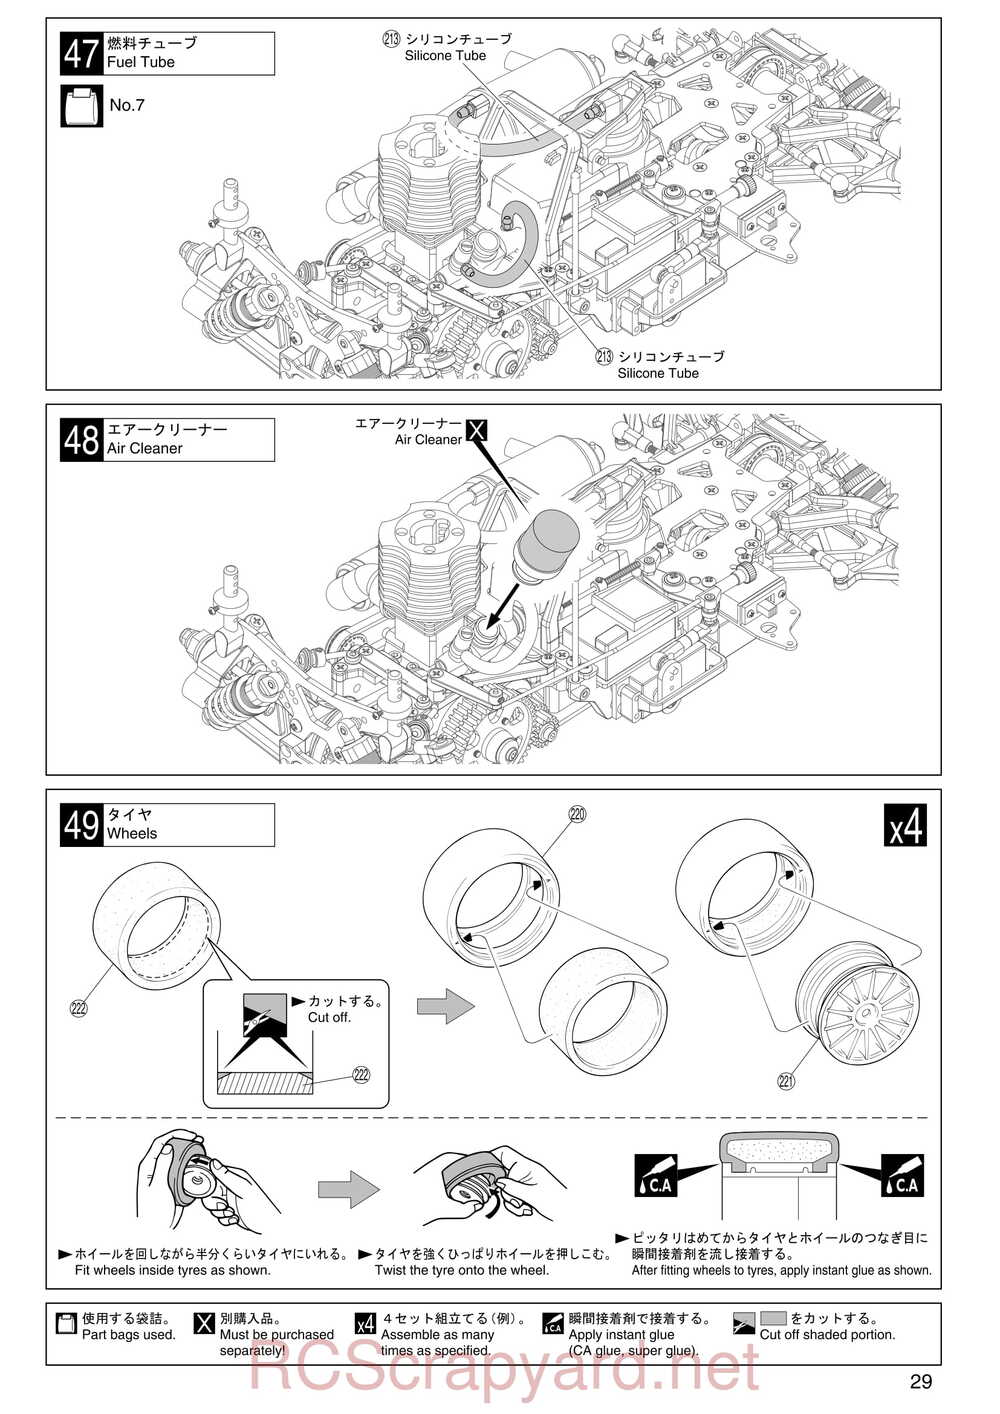 Kyosho - 31257 - V-One RRR Rubber - Manual - Page 29